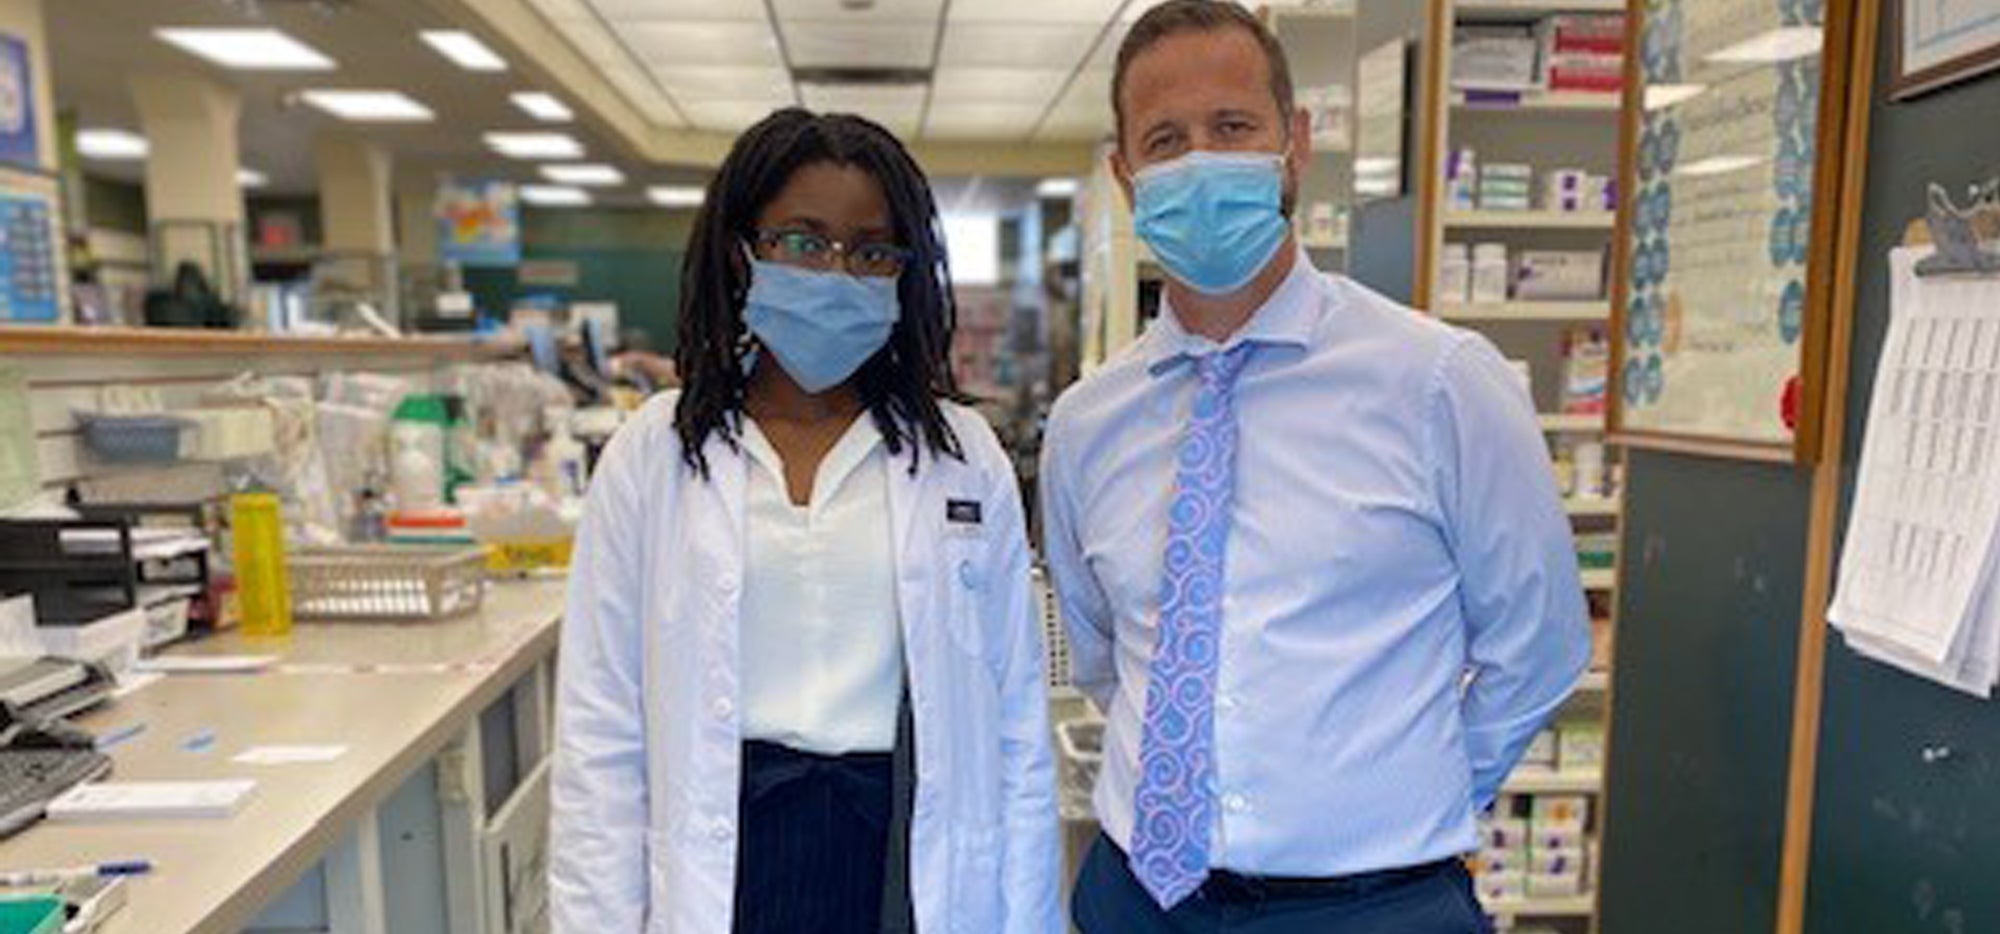 Carolyn Lawrence and Steven Bond wearing masks in the pharmacy